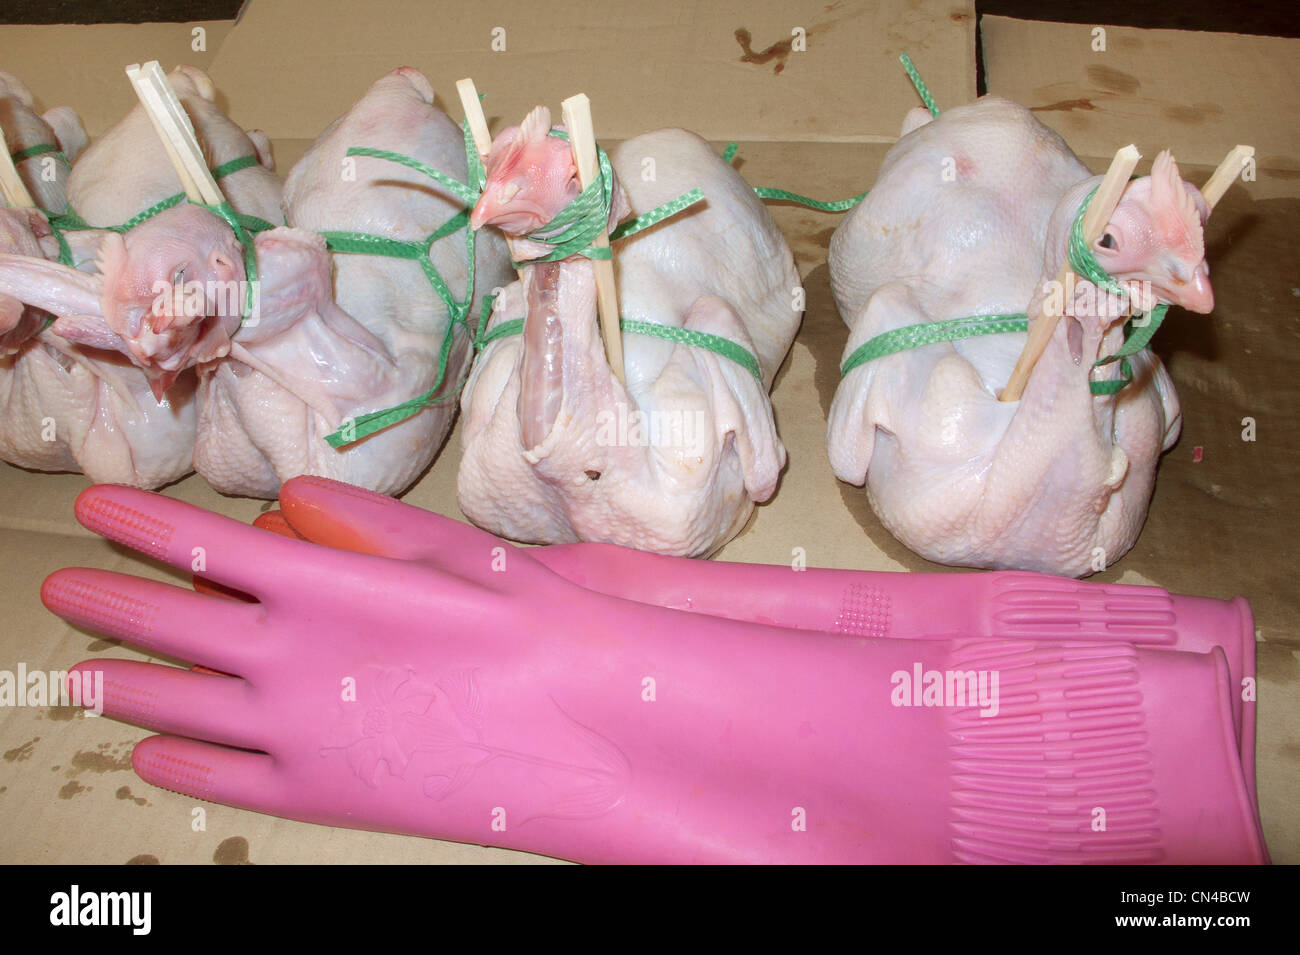 Four plucked chickens and pink rubber gloves Stock Photo